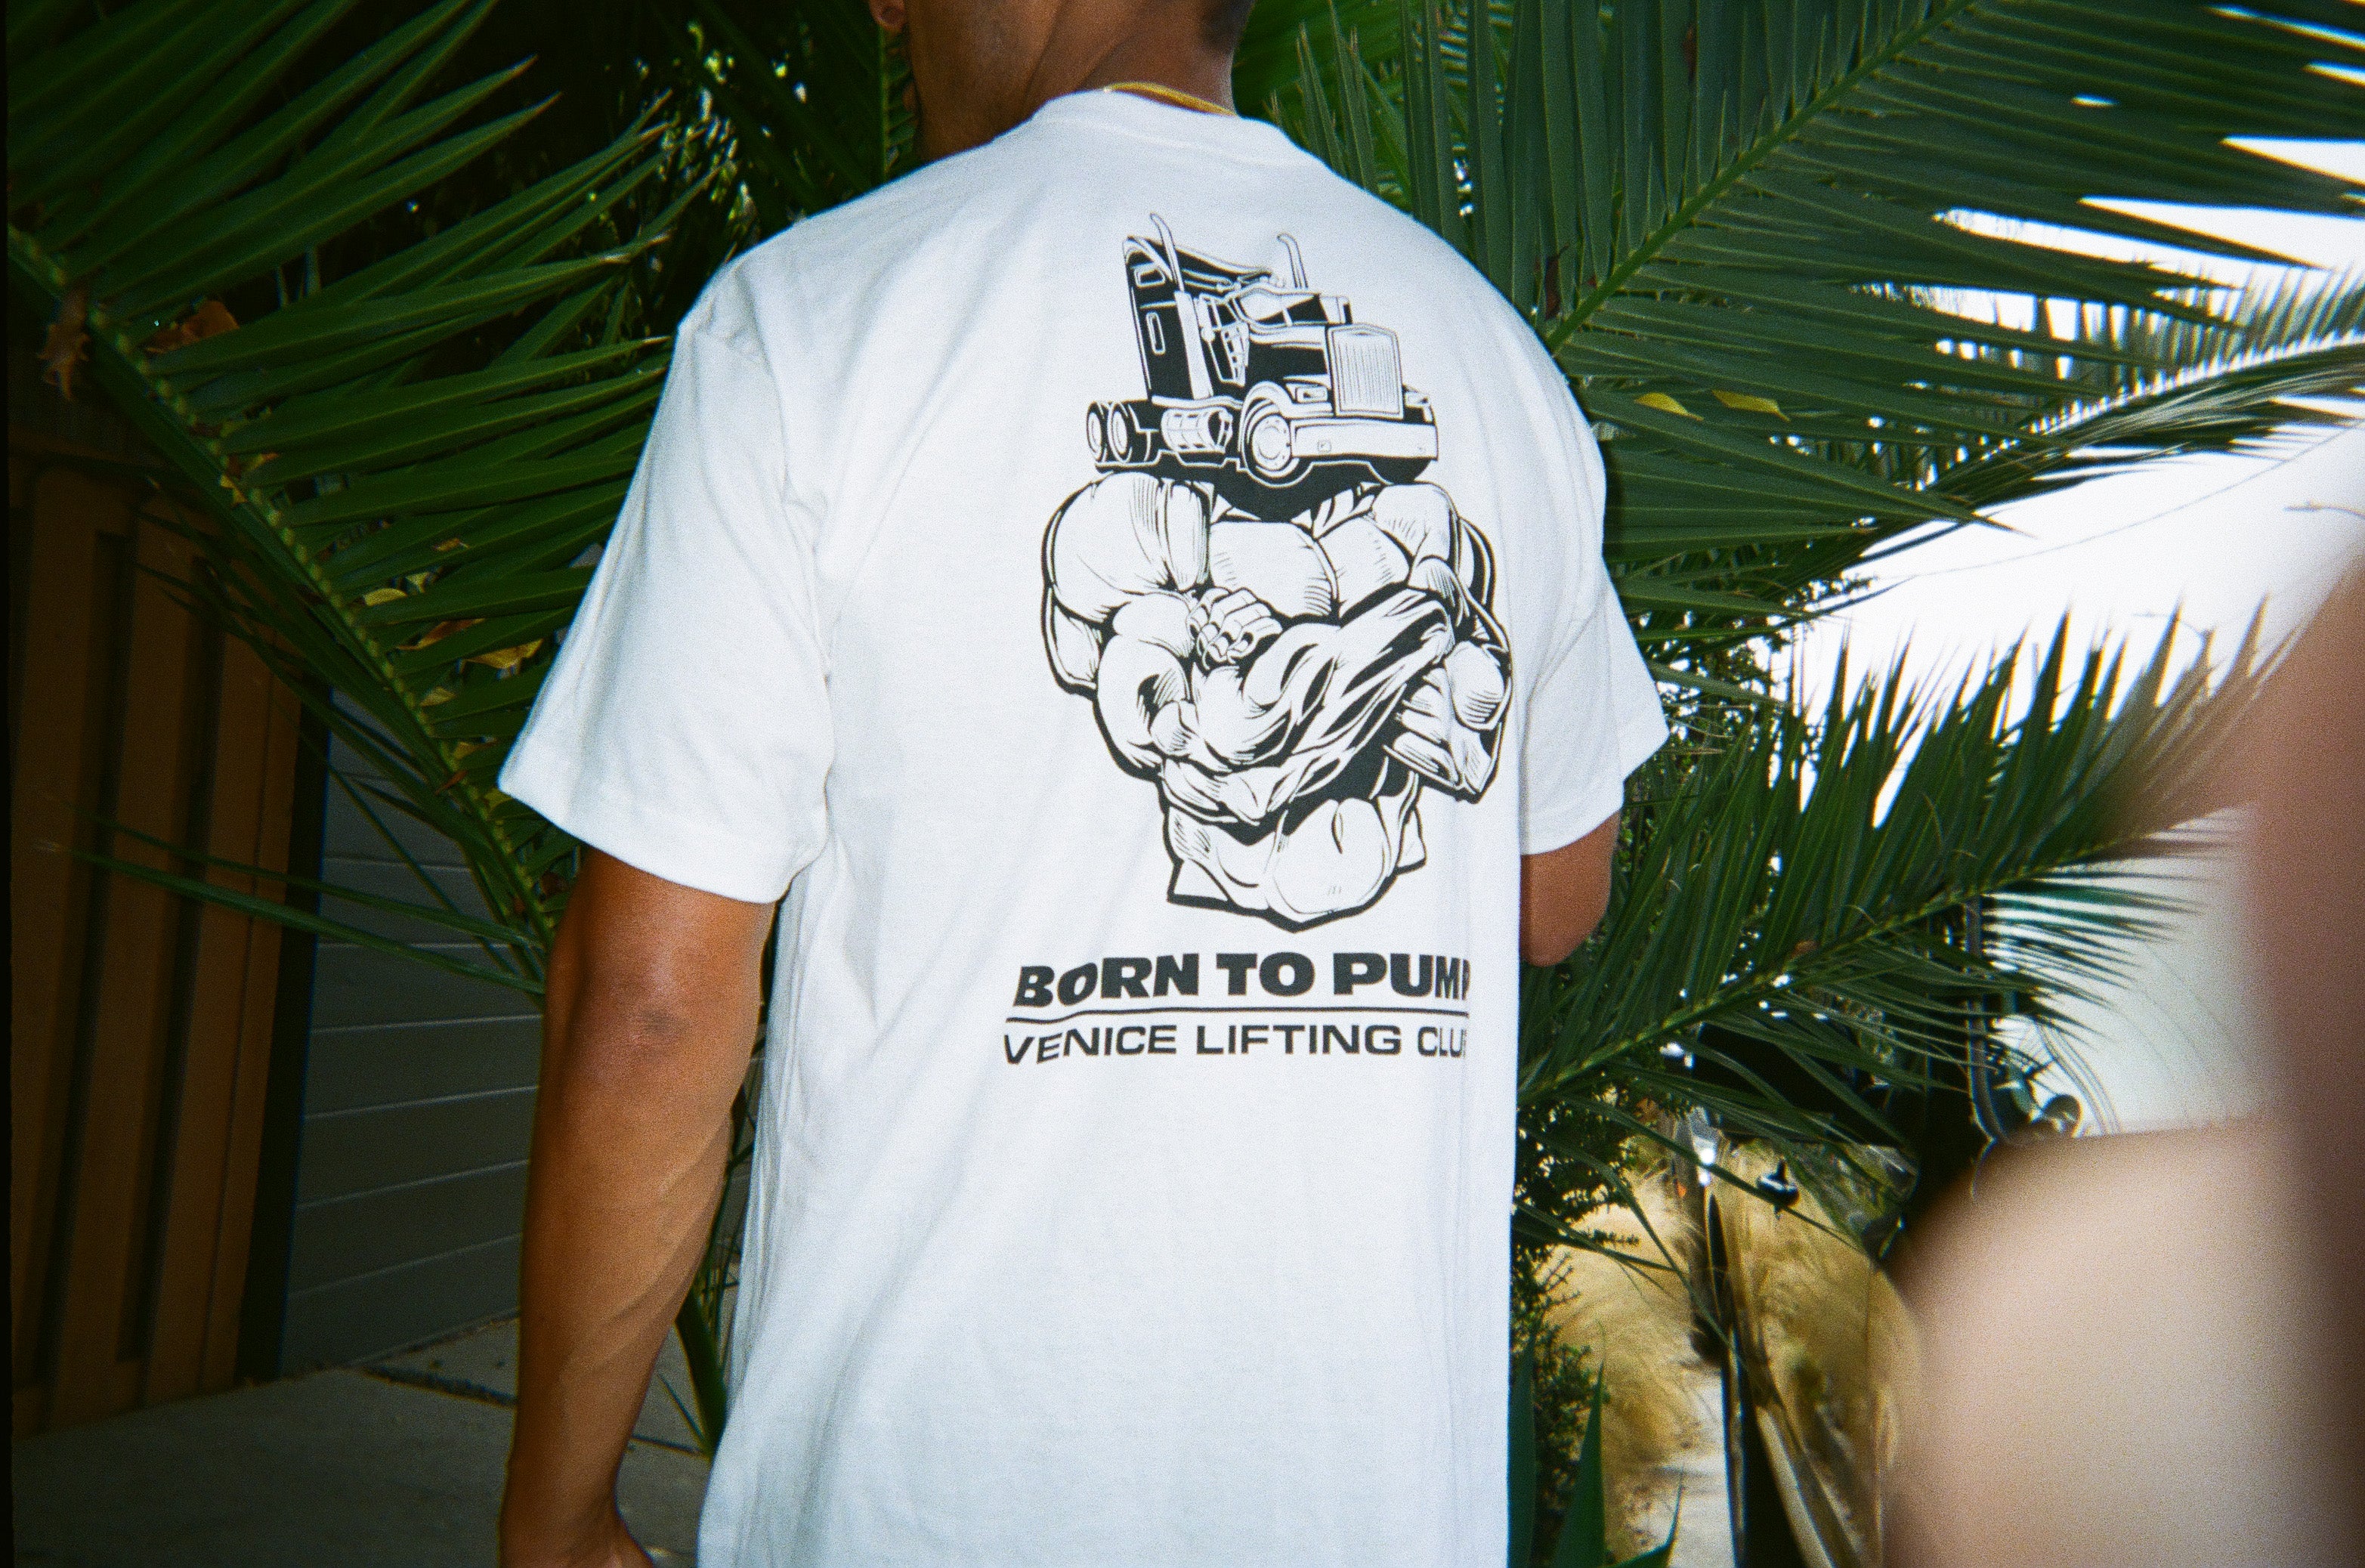 Venice Lifting Club, man wearing truck head t-shirt in front of palm tree